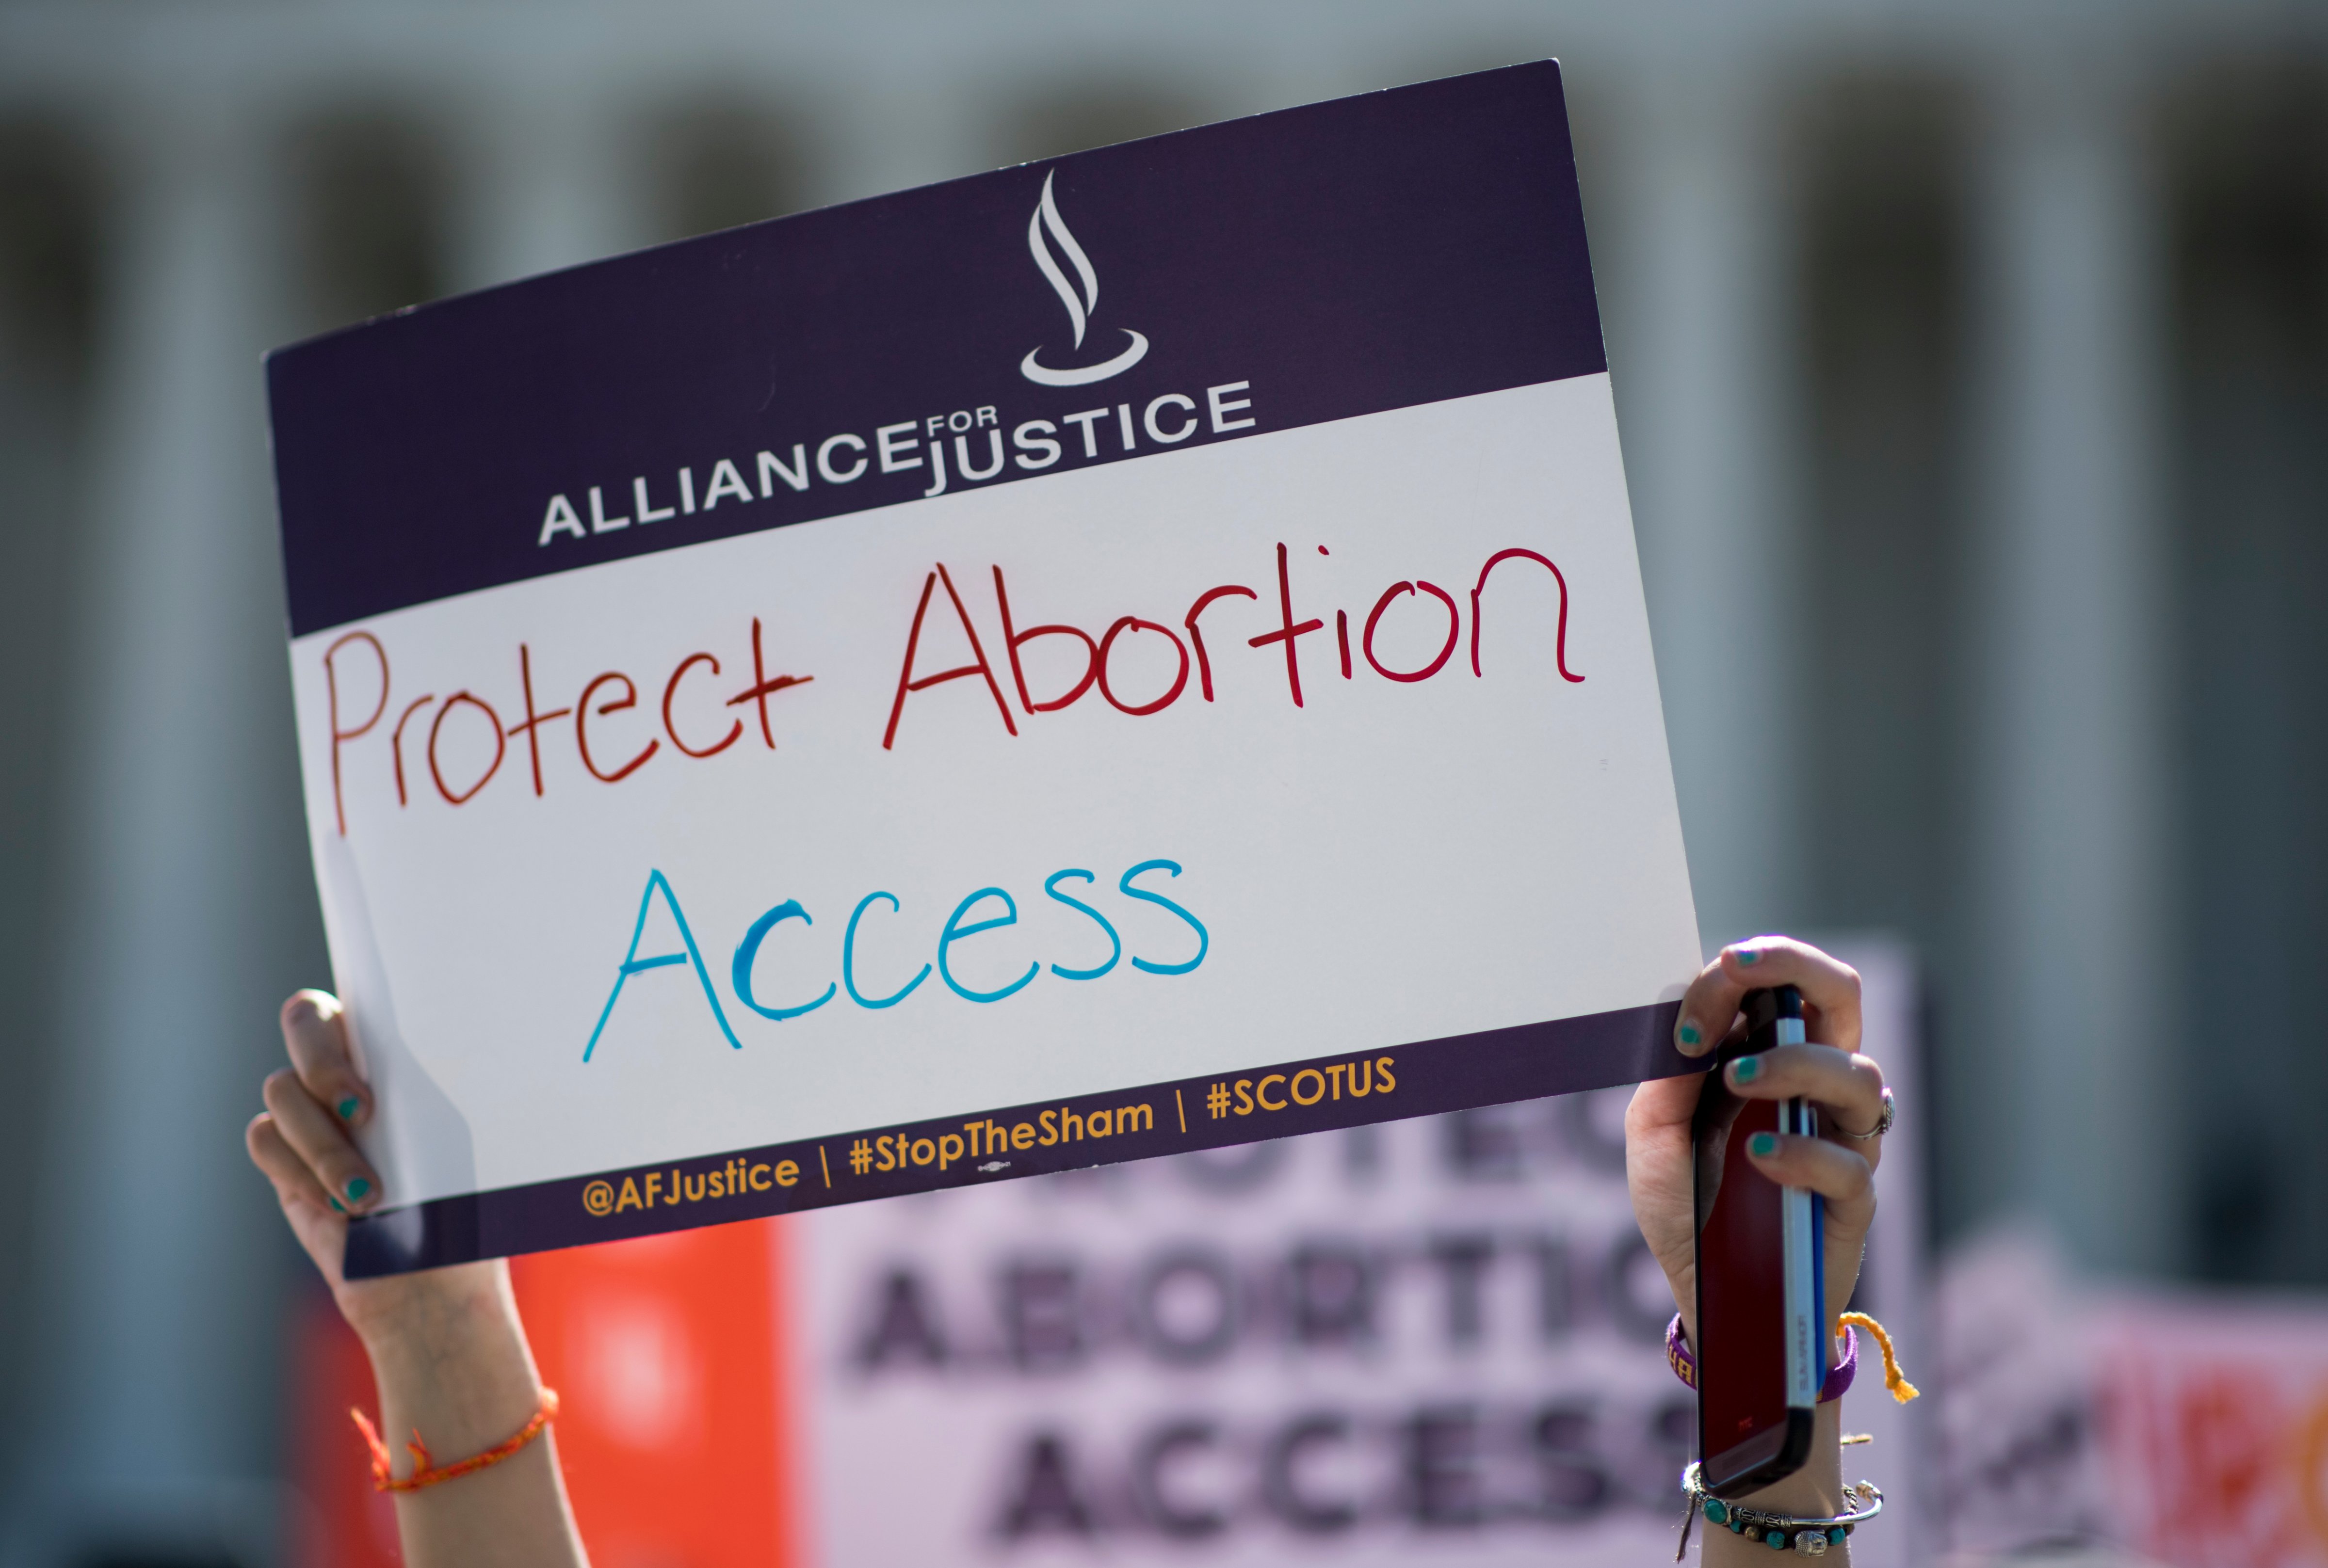 UNITED STATES - JUNE 20: Pro-choice and pro-life demonstrators rally outside of the U.S. Supreme Court on Monday morning, June 20, 2016. The court is expected to hand down their decision on a Texas law which requires clinics to meet the same standards as ambulatory surgical centers and forces doctors to have admitting privileges at nearby hospitals. (Photo By Bill Clark/CQ Roll Call) (Bill Clark—CQ-Roll Call,Inc.)